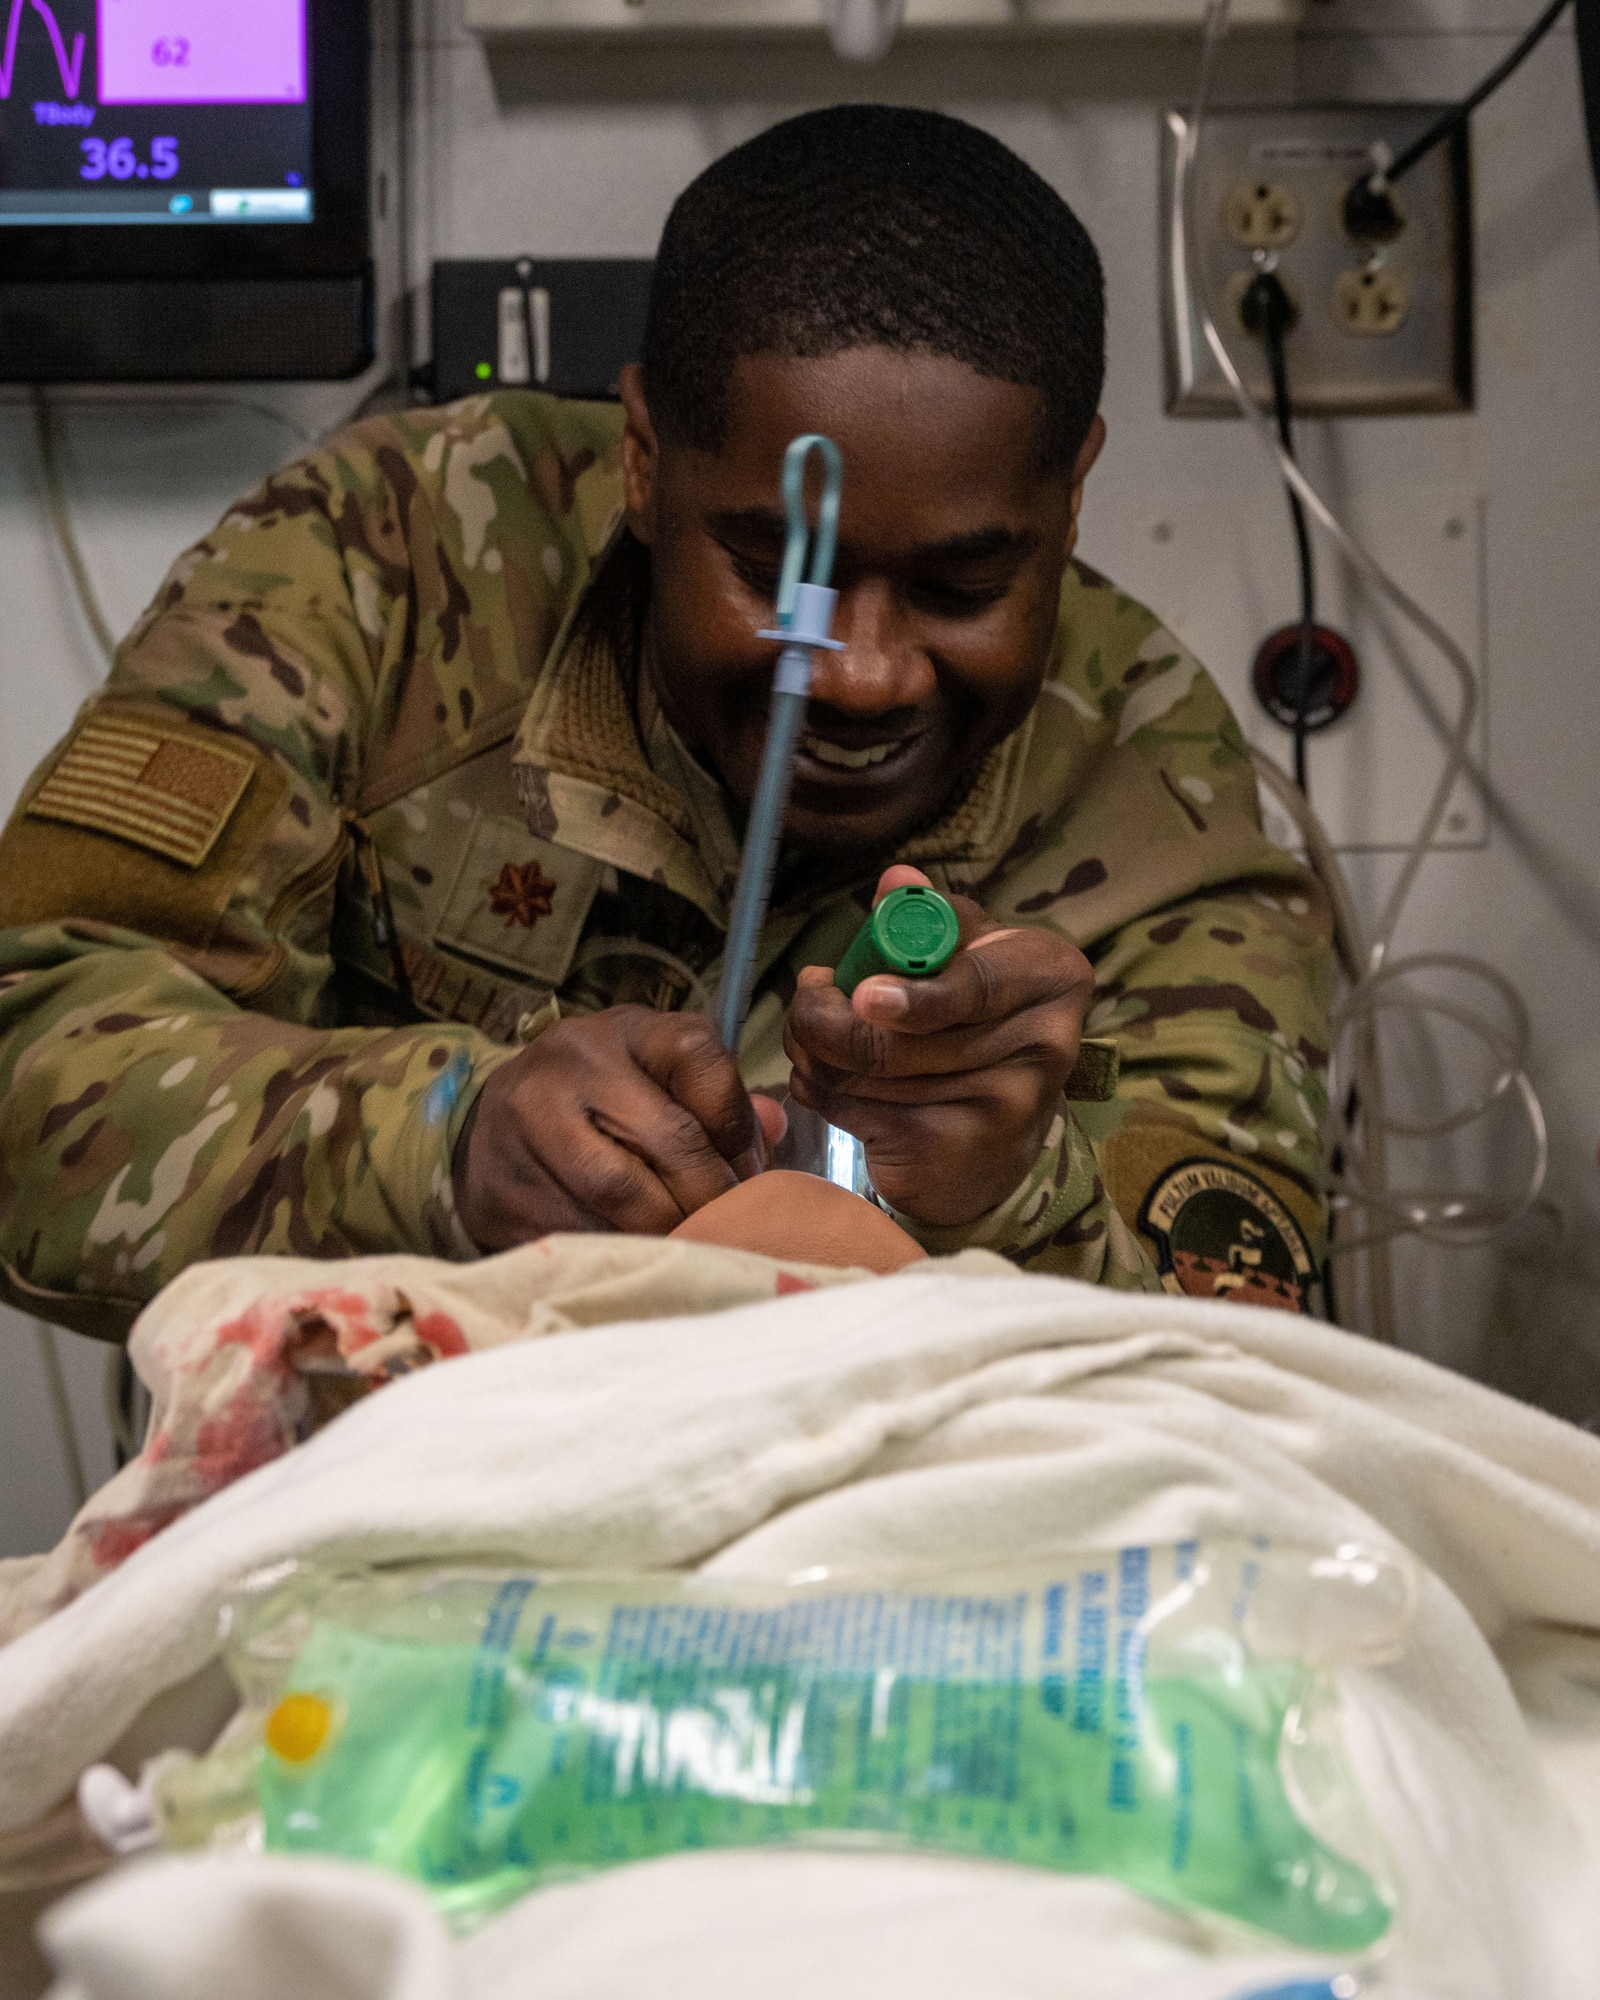 U.S. Air Force Maj. John Williams, 5th Medical Group (MDG) nurse, inserts endotracheal tubing into a simulated patient during a 5th MDG training day at Minot Air Force Base, North Dakota, Jan. 11, 2023. The endotracheal tubing is put in place in order to provide the patient with an artificial airway.